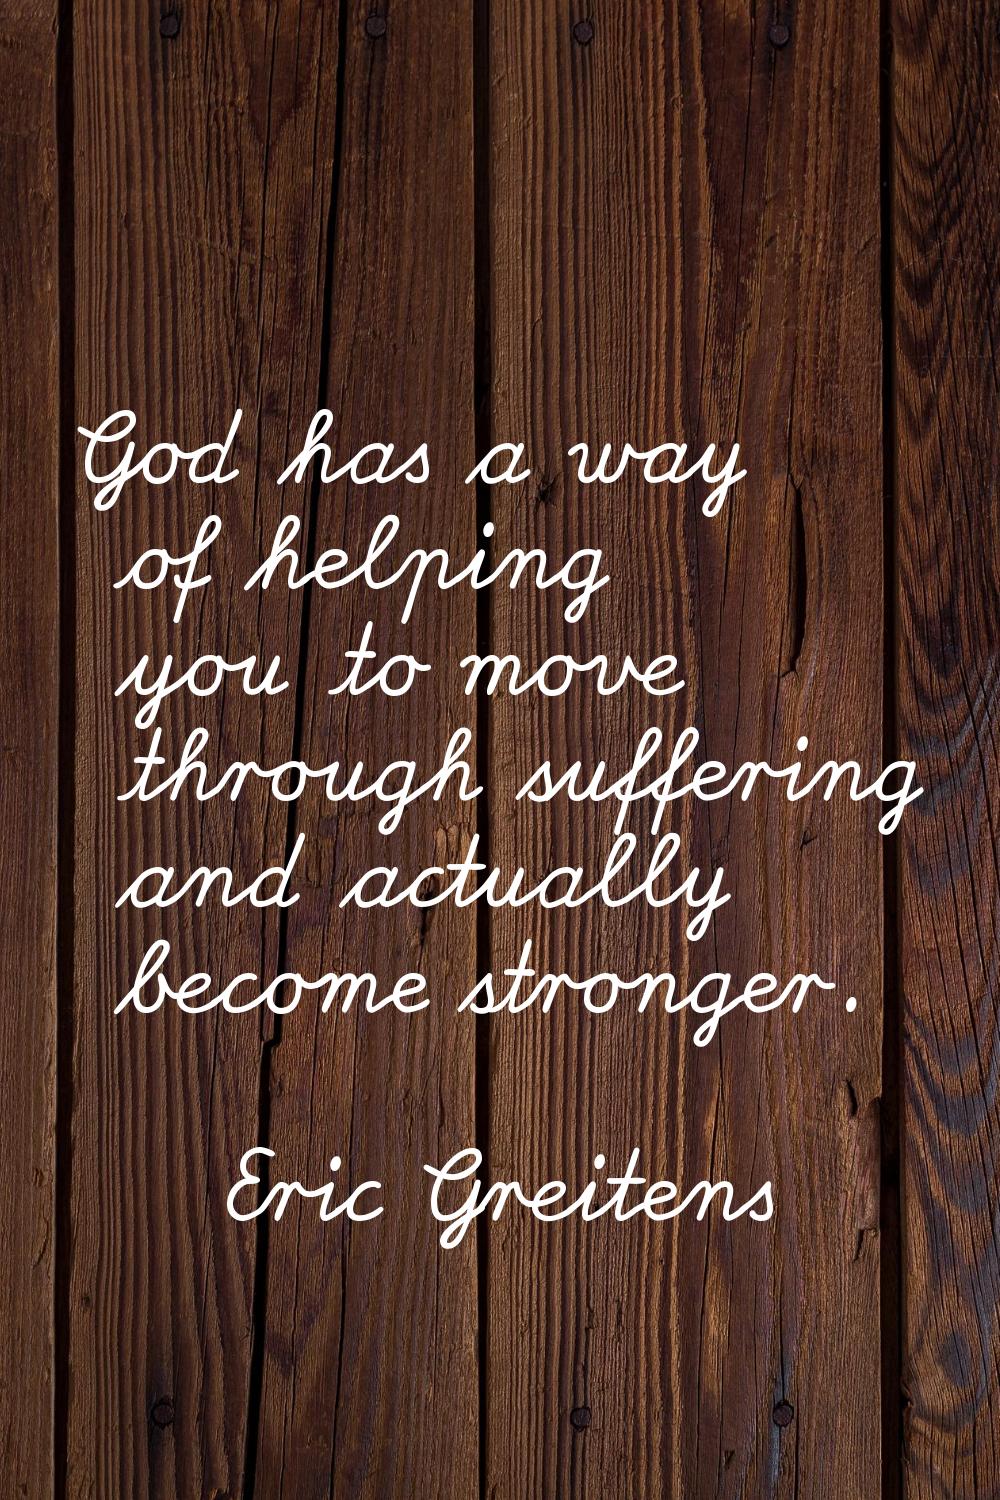 God has a way of helping you to move through suffering and actually become stronger.